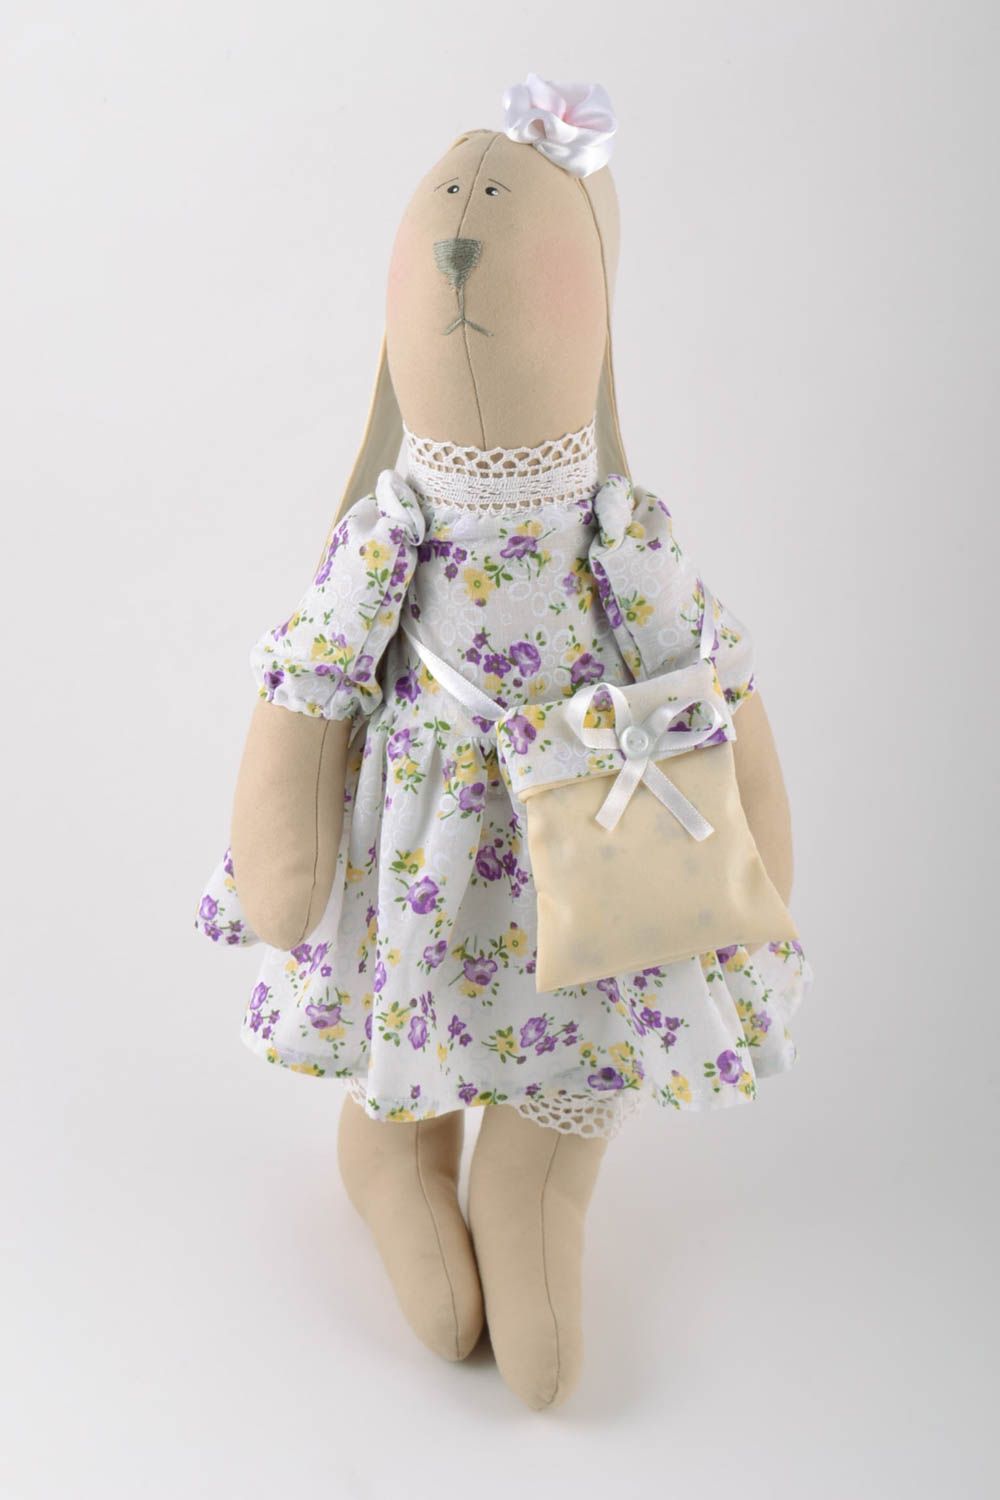 Handmade linen fabric soft toy rabbit in floral dress with small bag for children photo 4